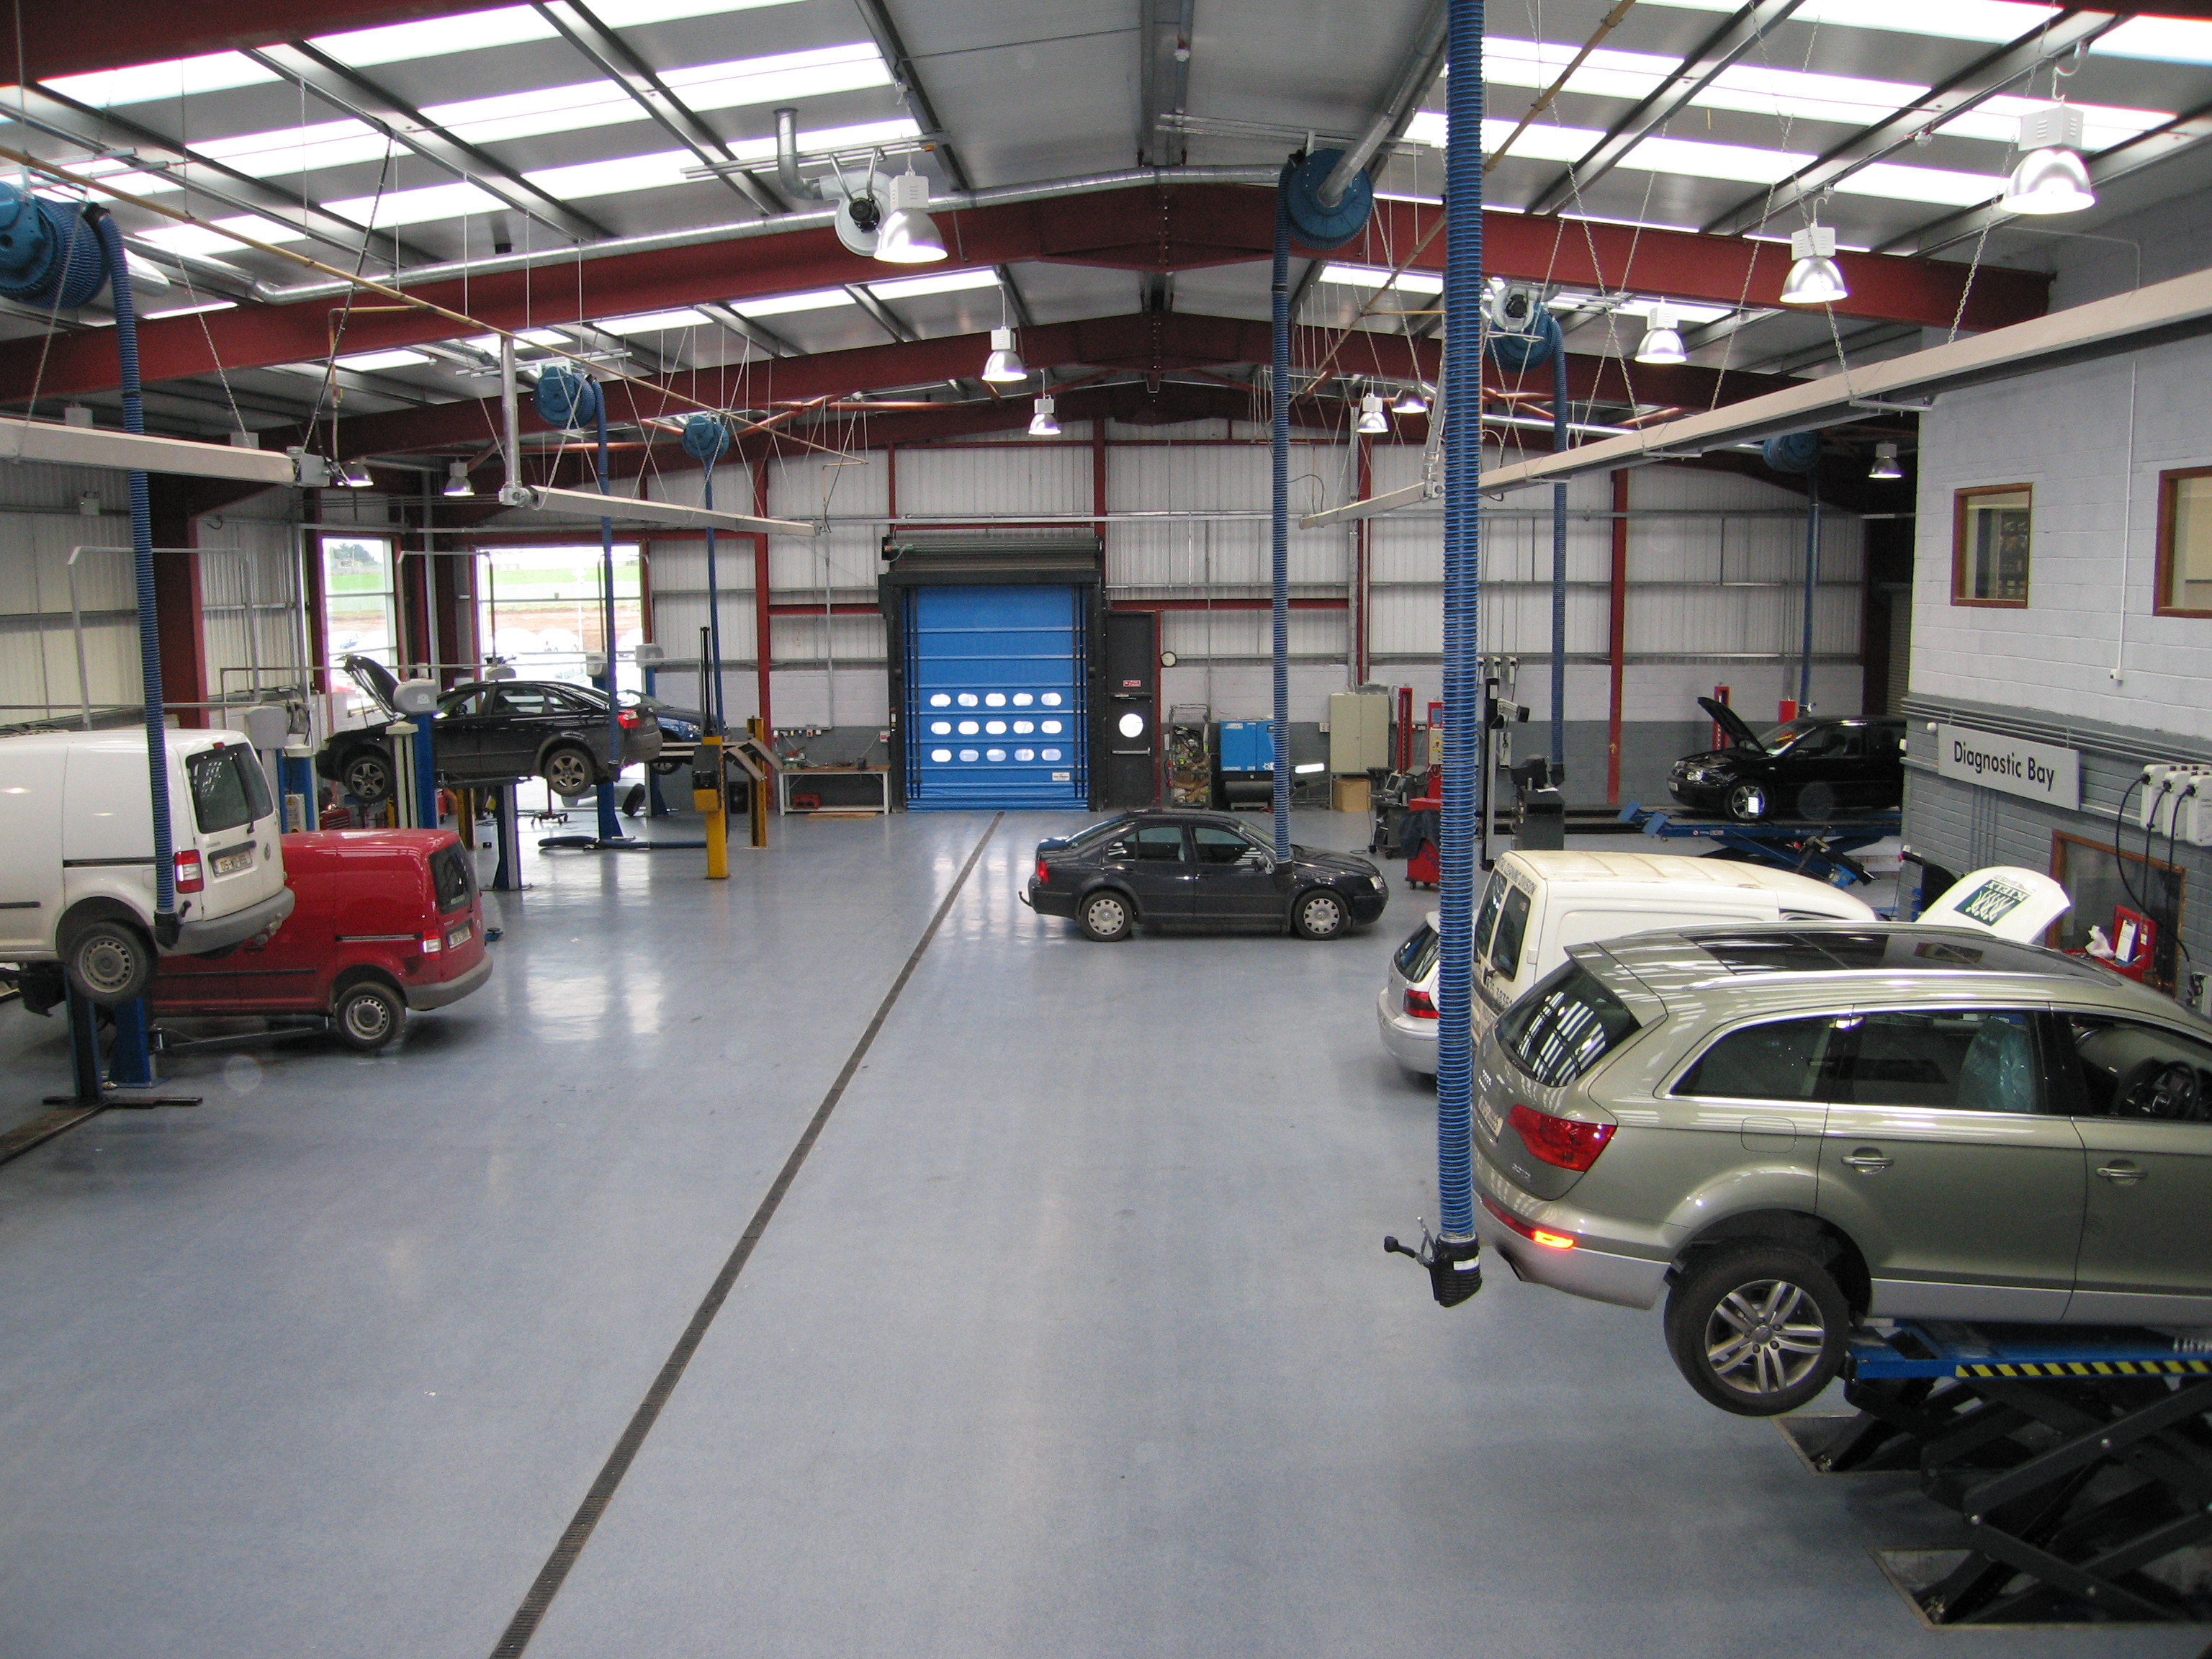 PMMA resin flooring solution for Auto Service workshop